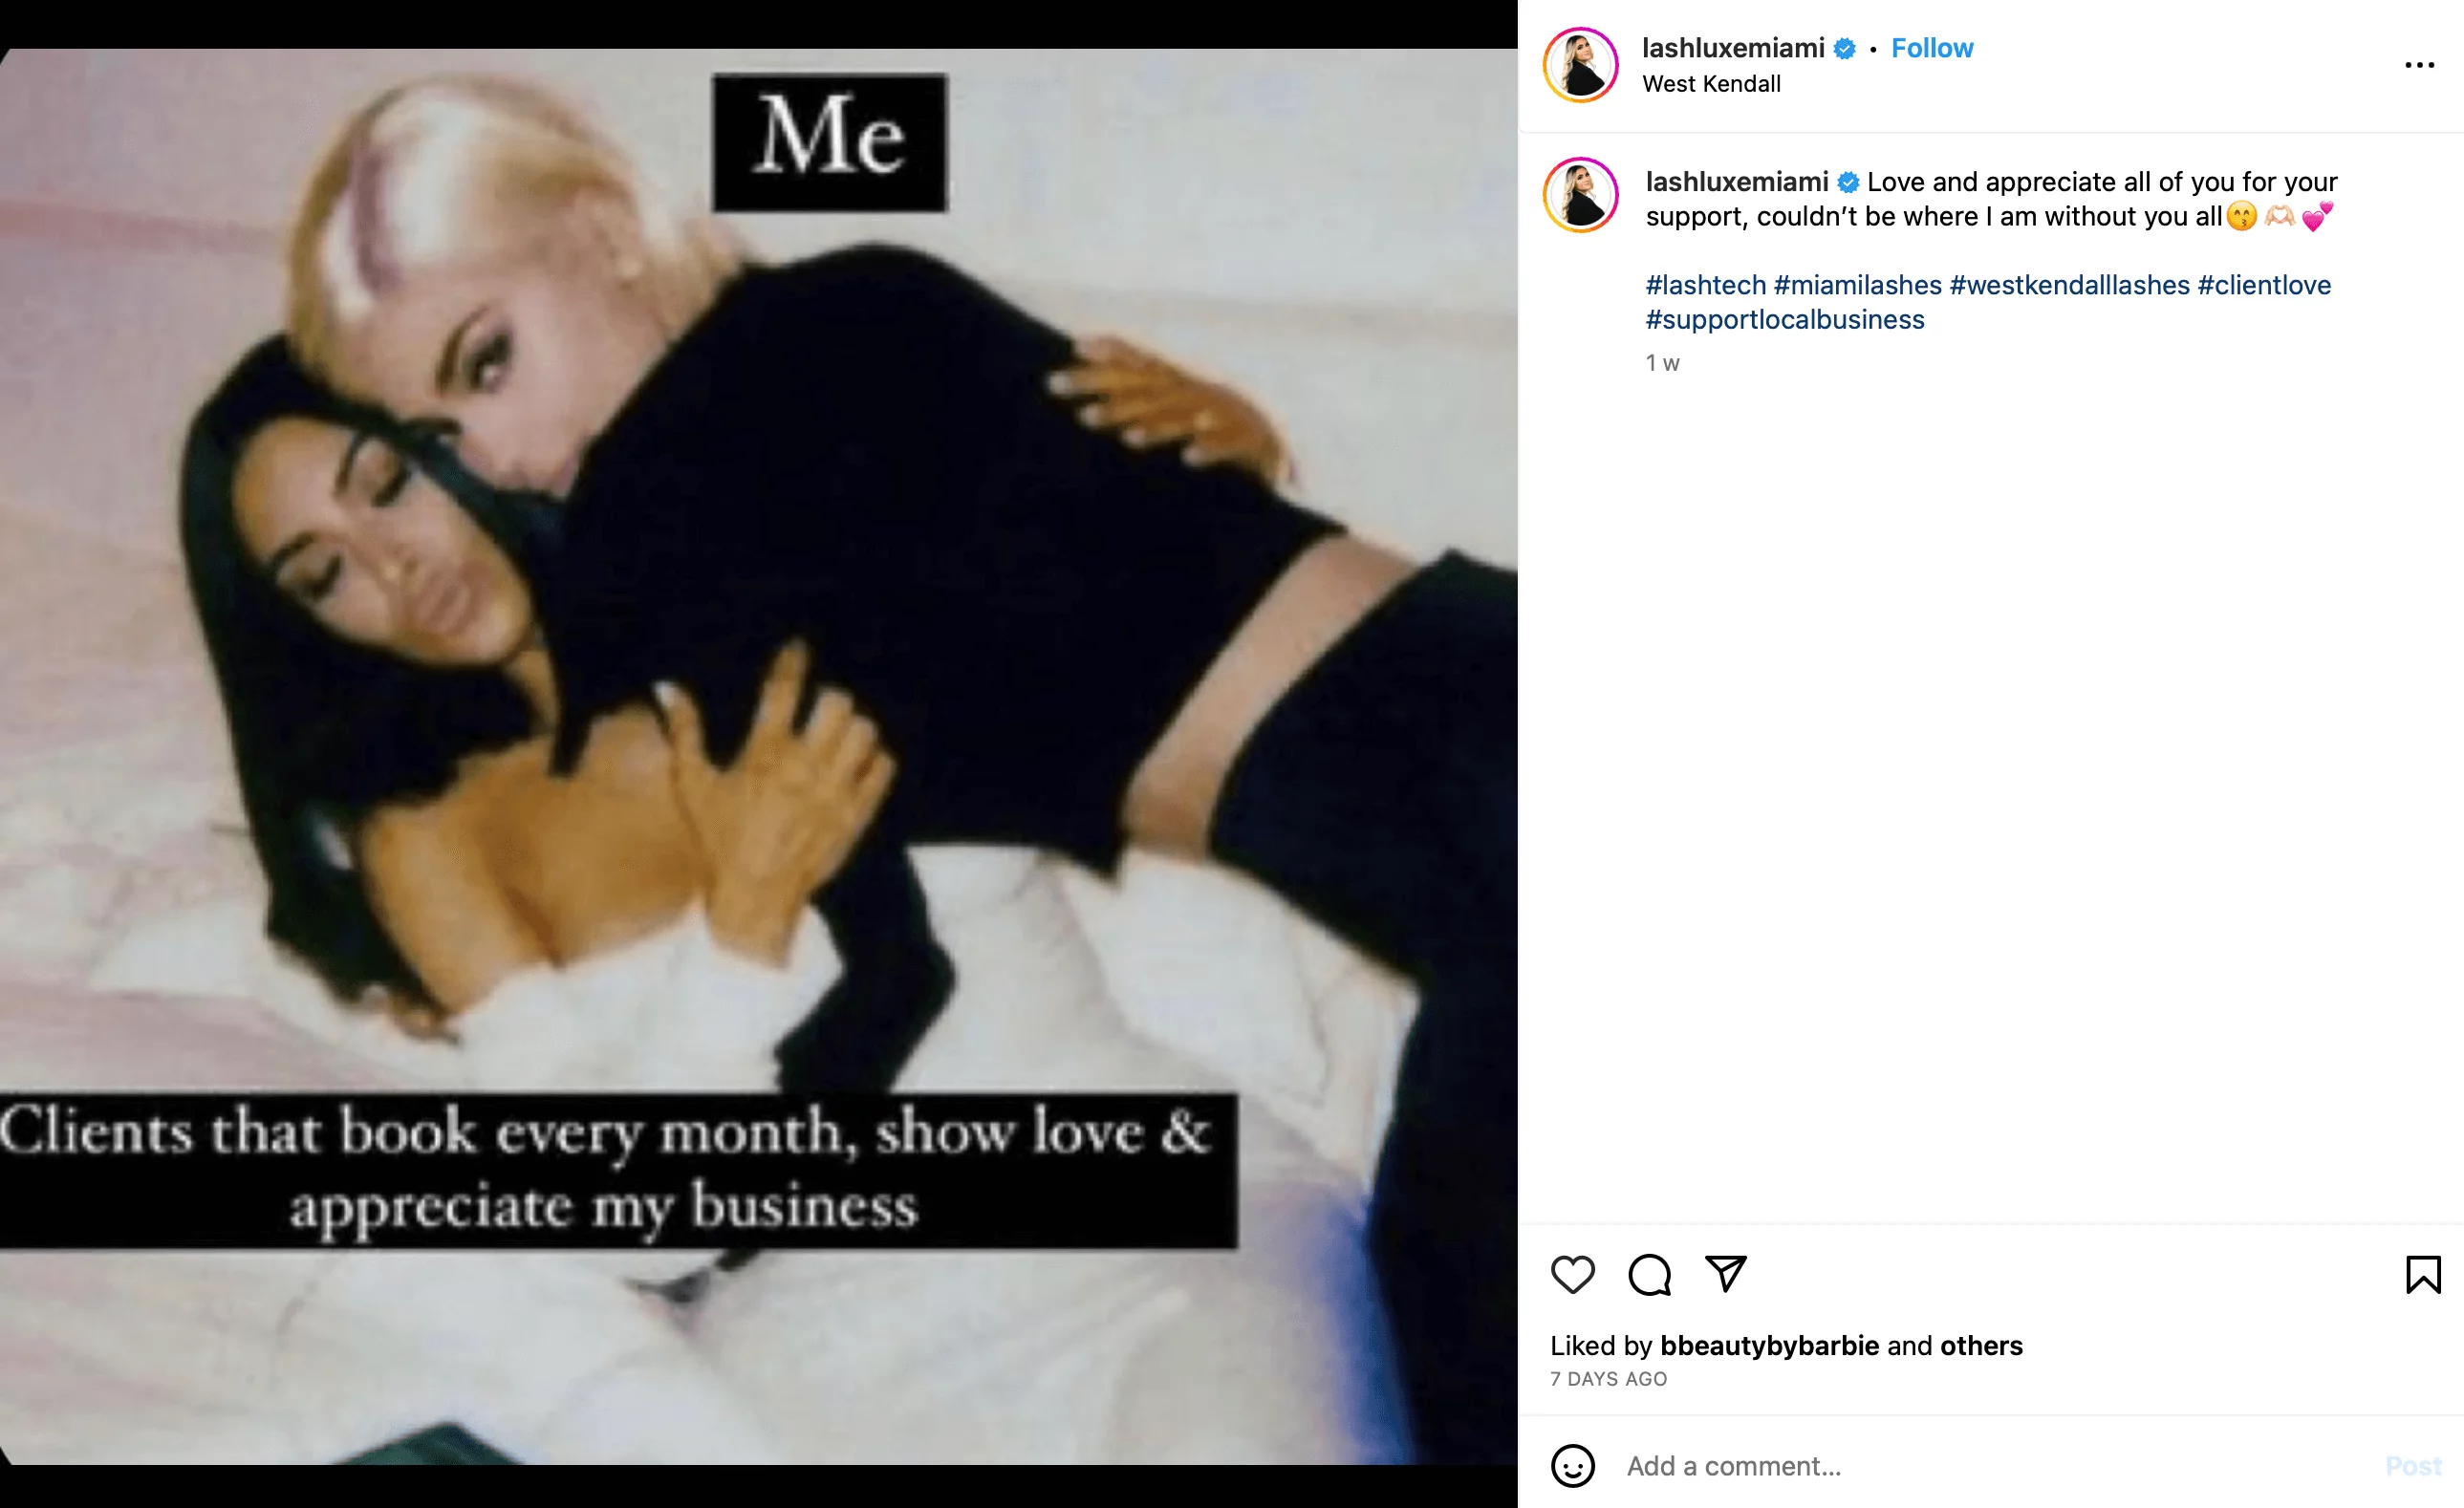 @lashluxemiami's meme on Instagram with two Kardashian sisters about her and clients appreciating her business.